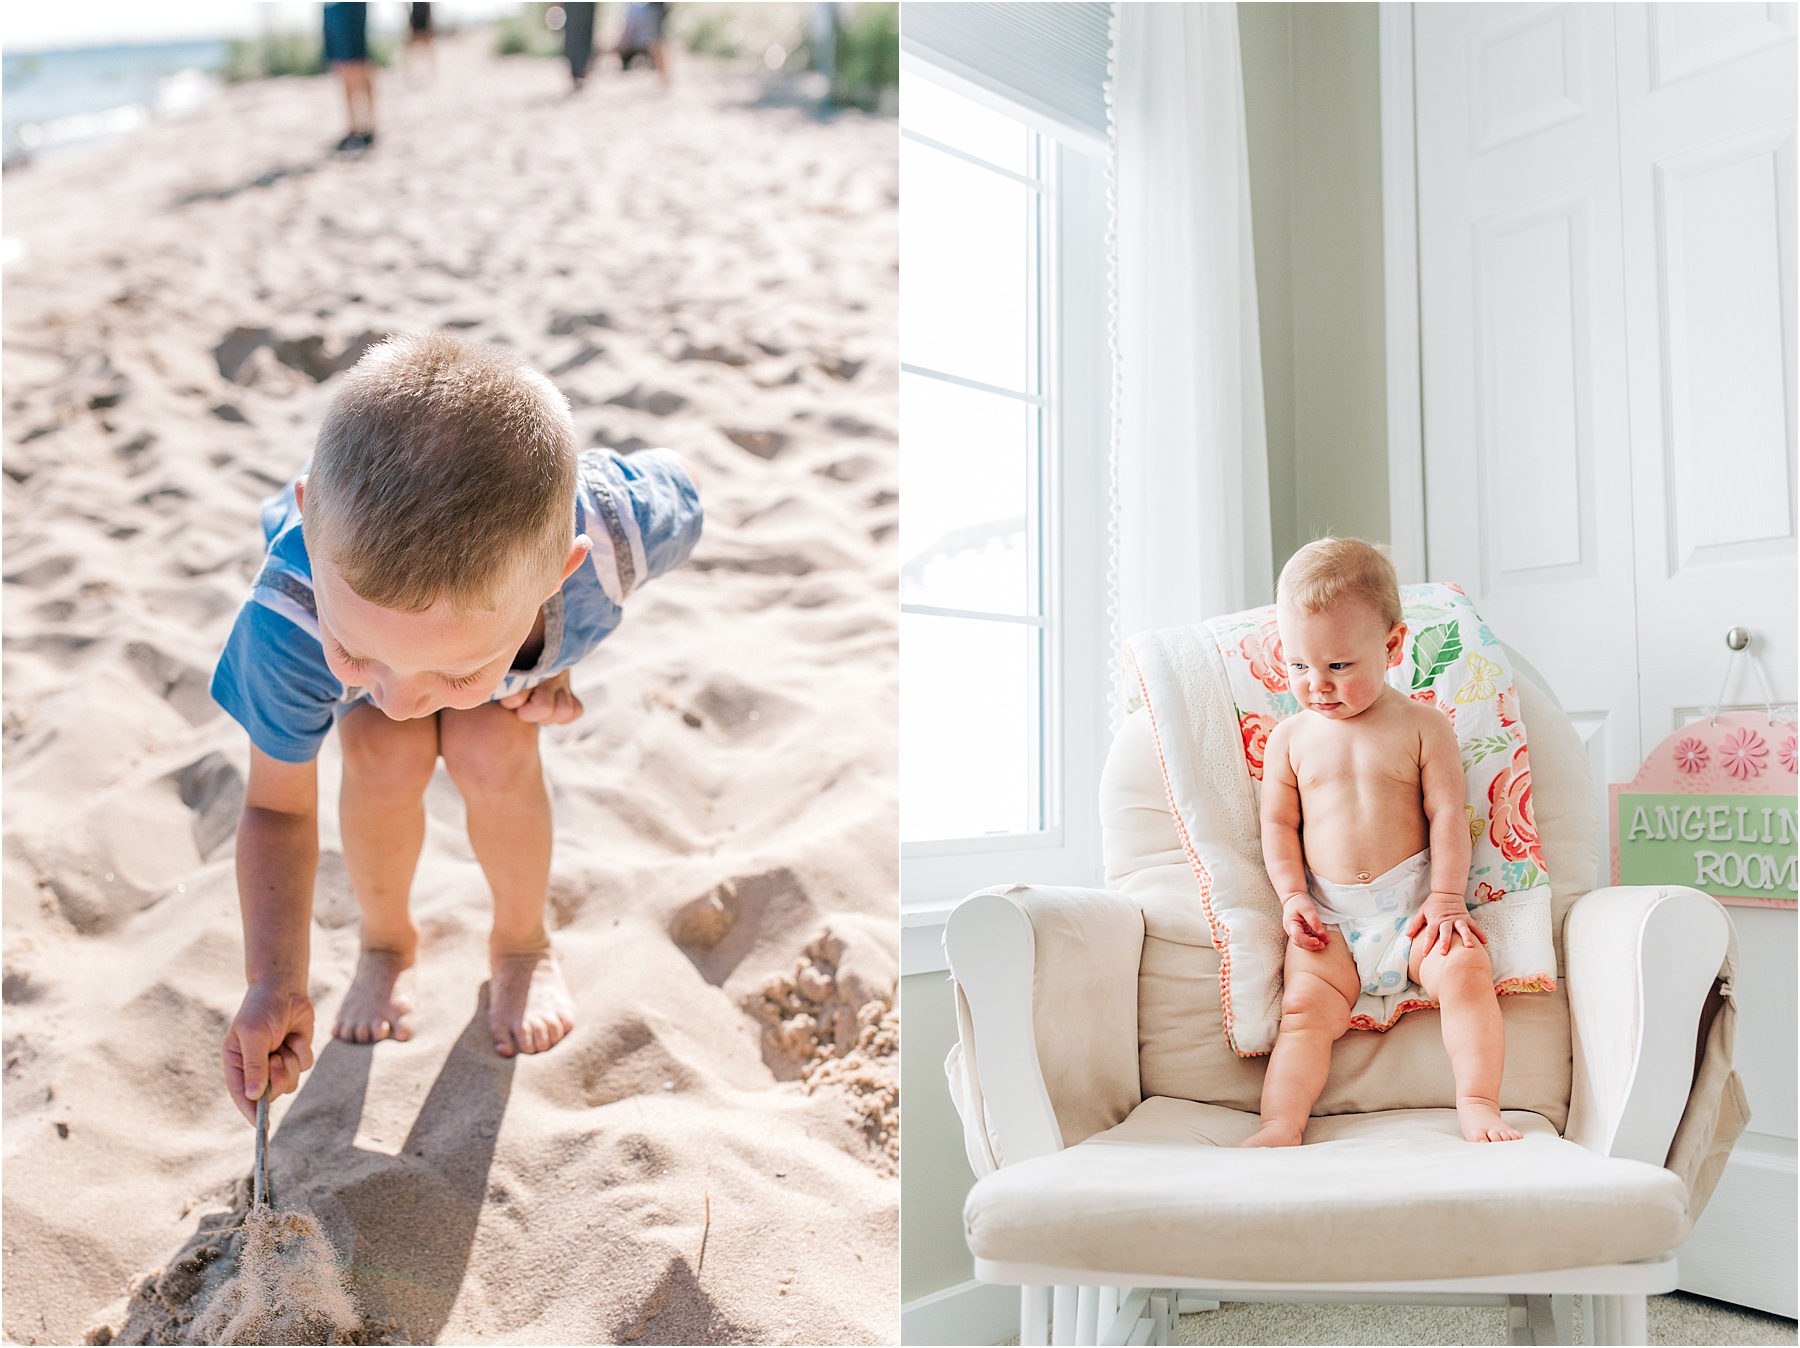 Kid on the beach, and baby standing next to a pretty window